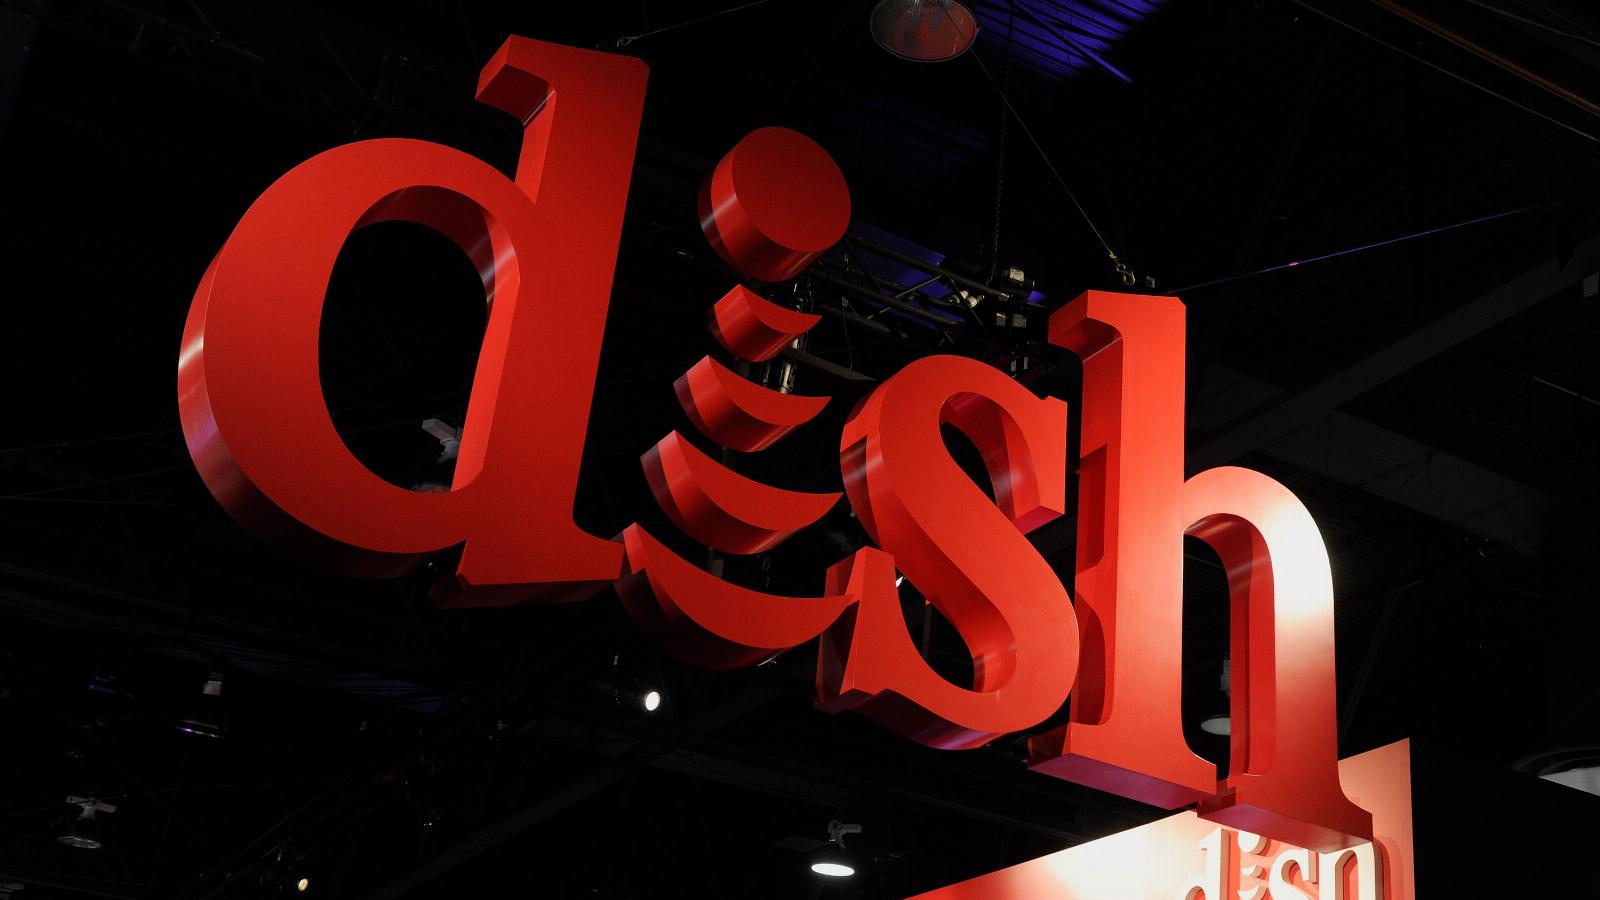 Dish customers kept in the dark as ransomware fallout continues